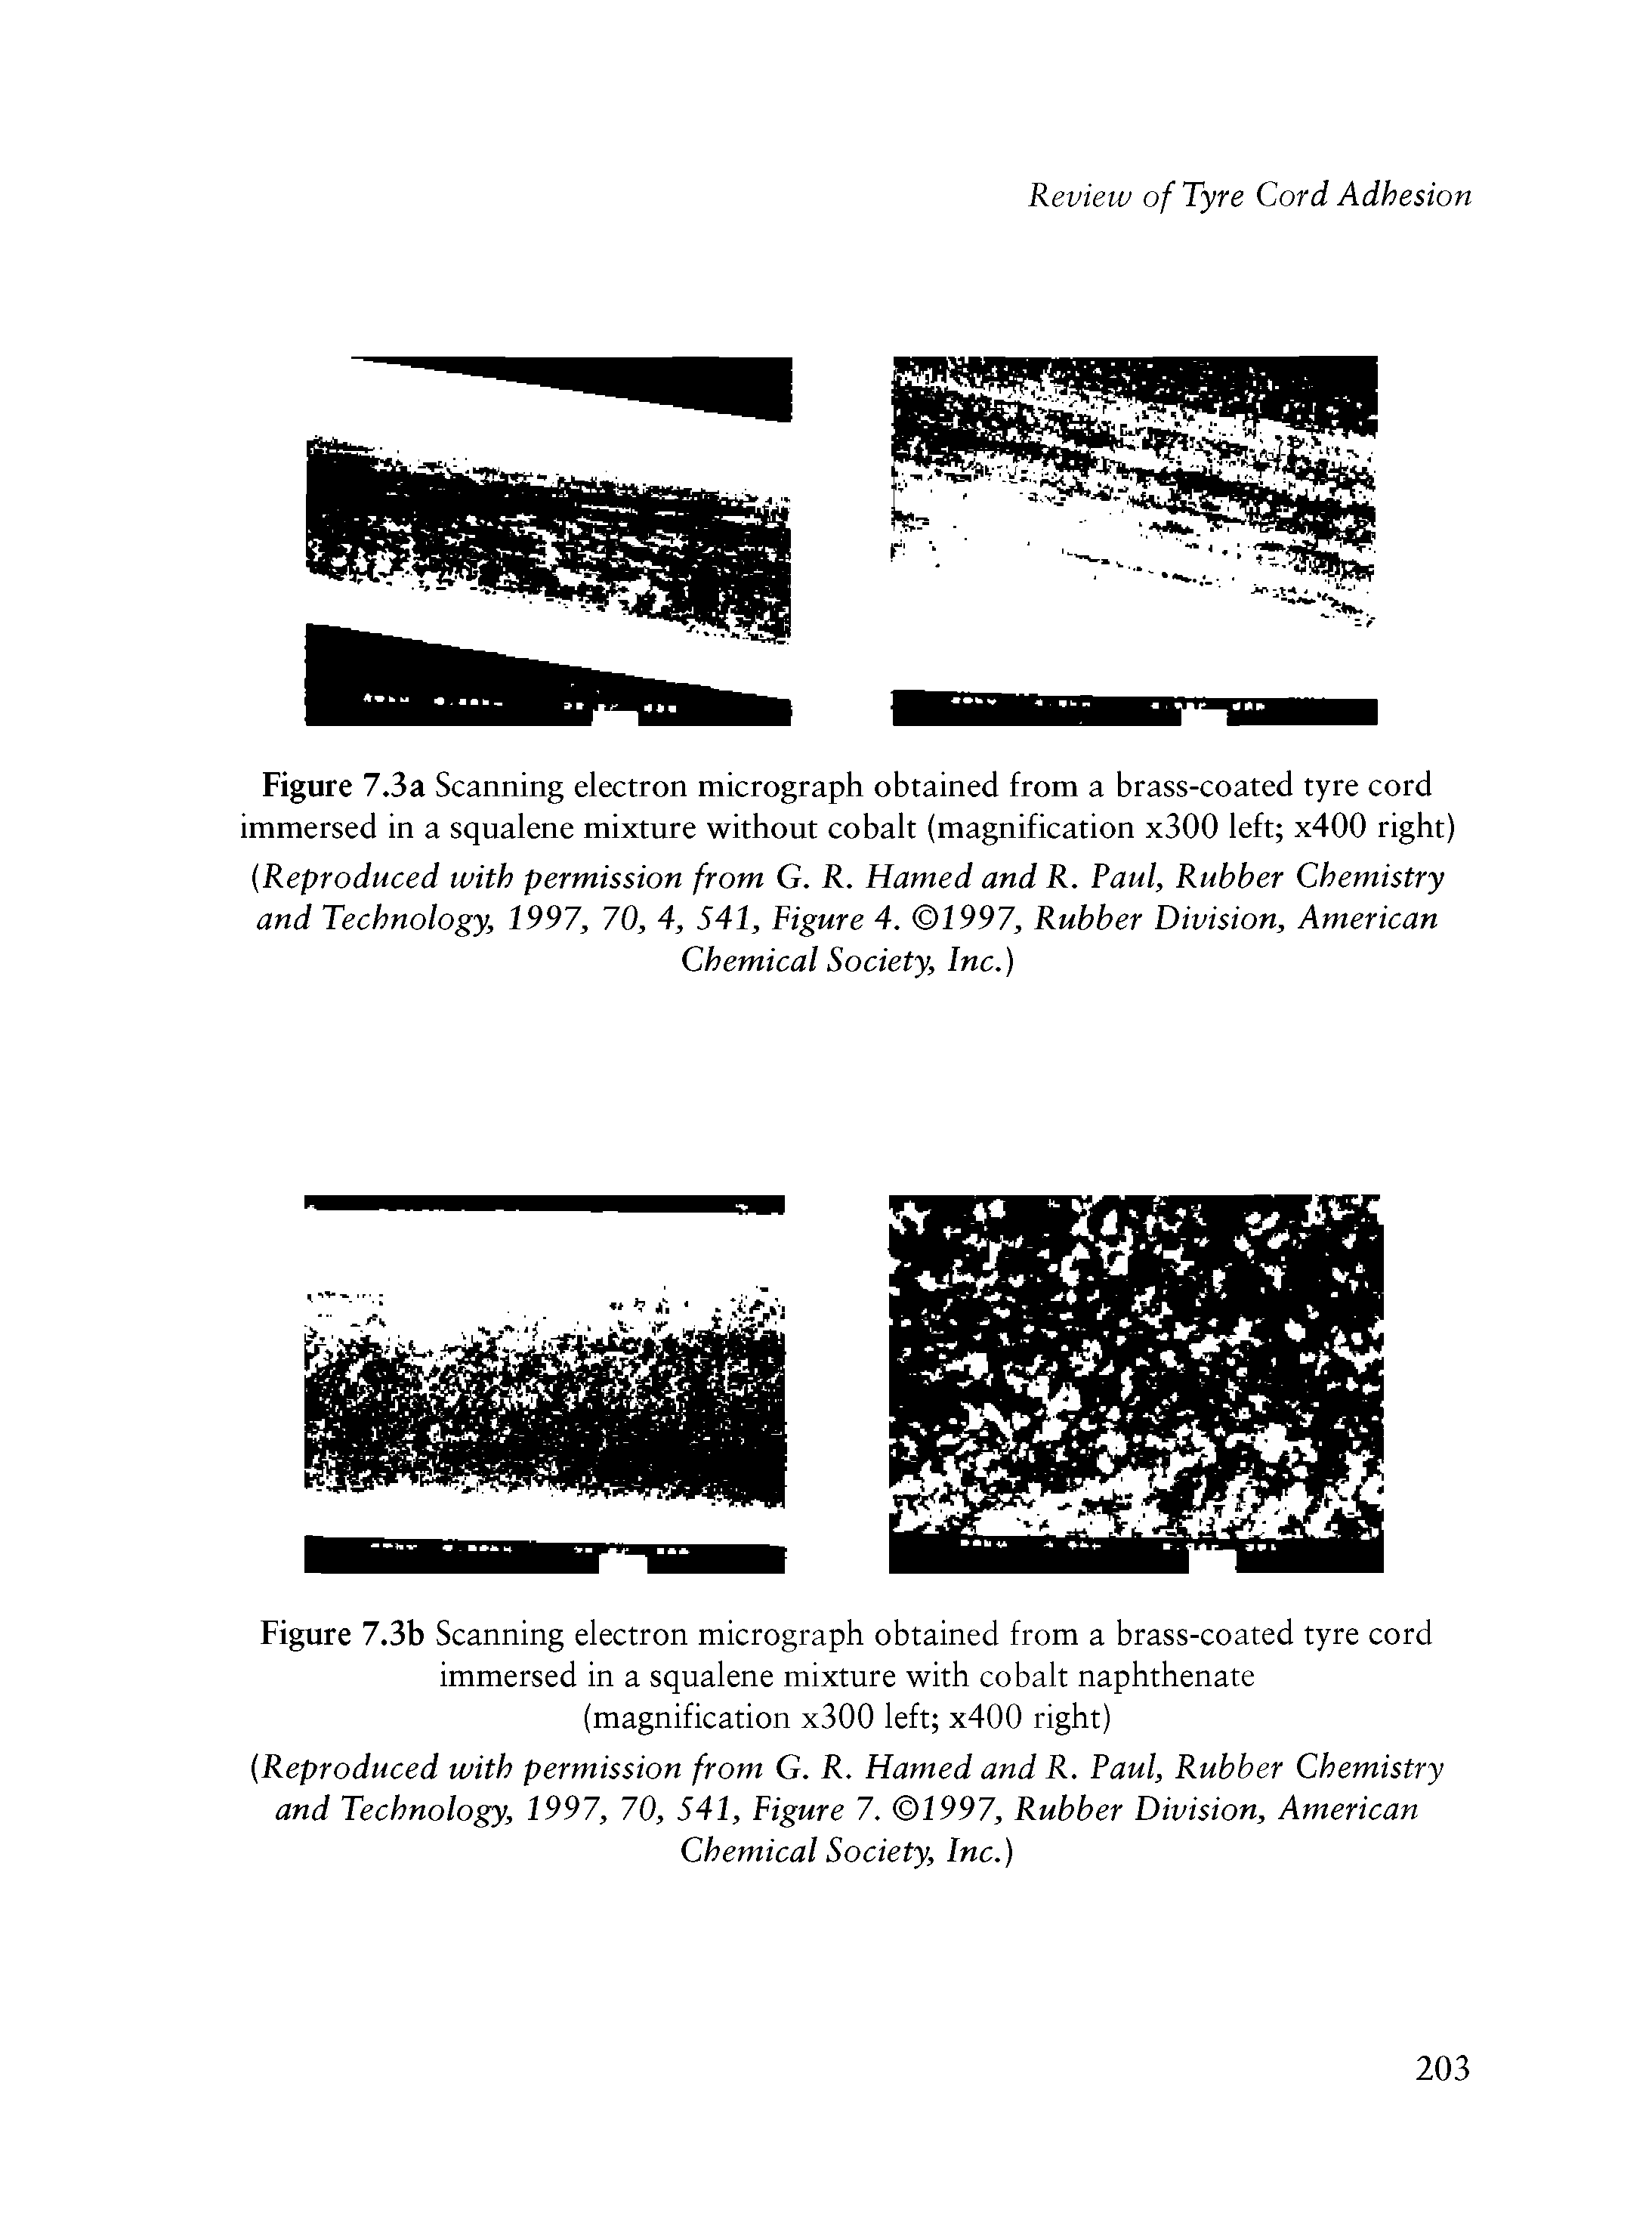 Figure 7.3a Scanning electron micrograph obtained from a brass-coated tyre cord immersed in a squalene mixture without cobalt (magnification x300 left x400 right) Reproduced with permission from G. R. Hamed and R. Paul, Rubber Chemistry and Technology, 1997, 70, 4, 541, Figure 4. 1997, Rubber Division, American...